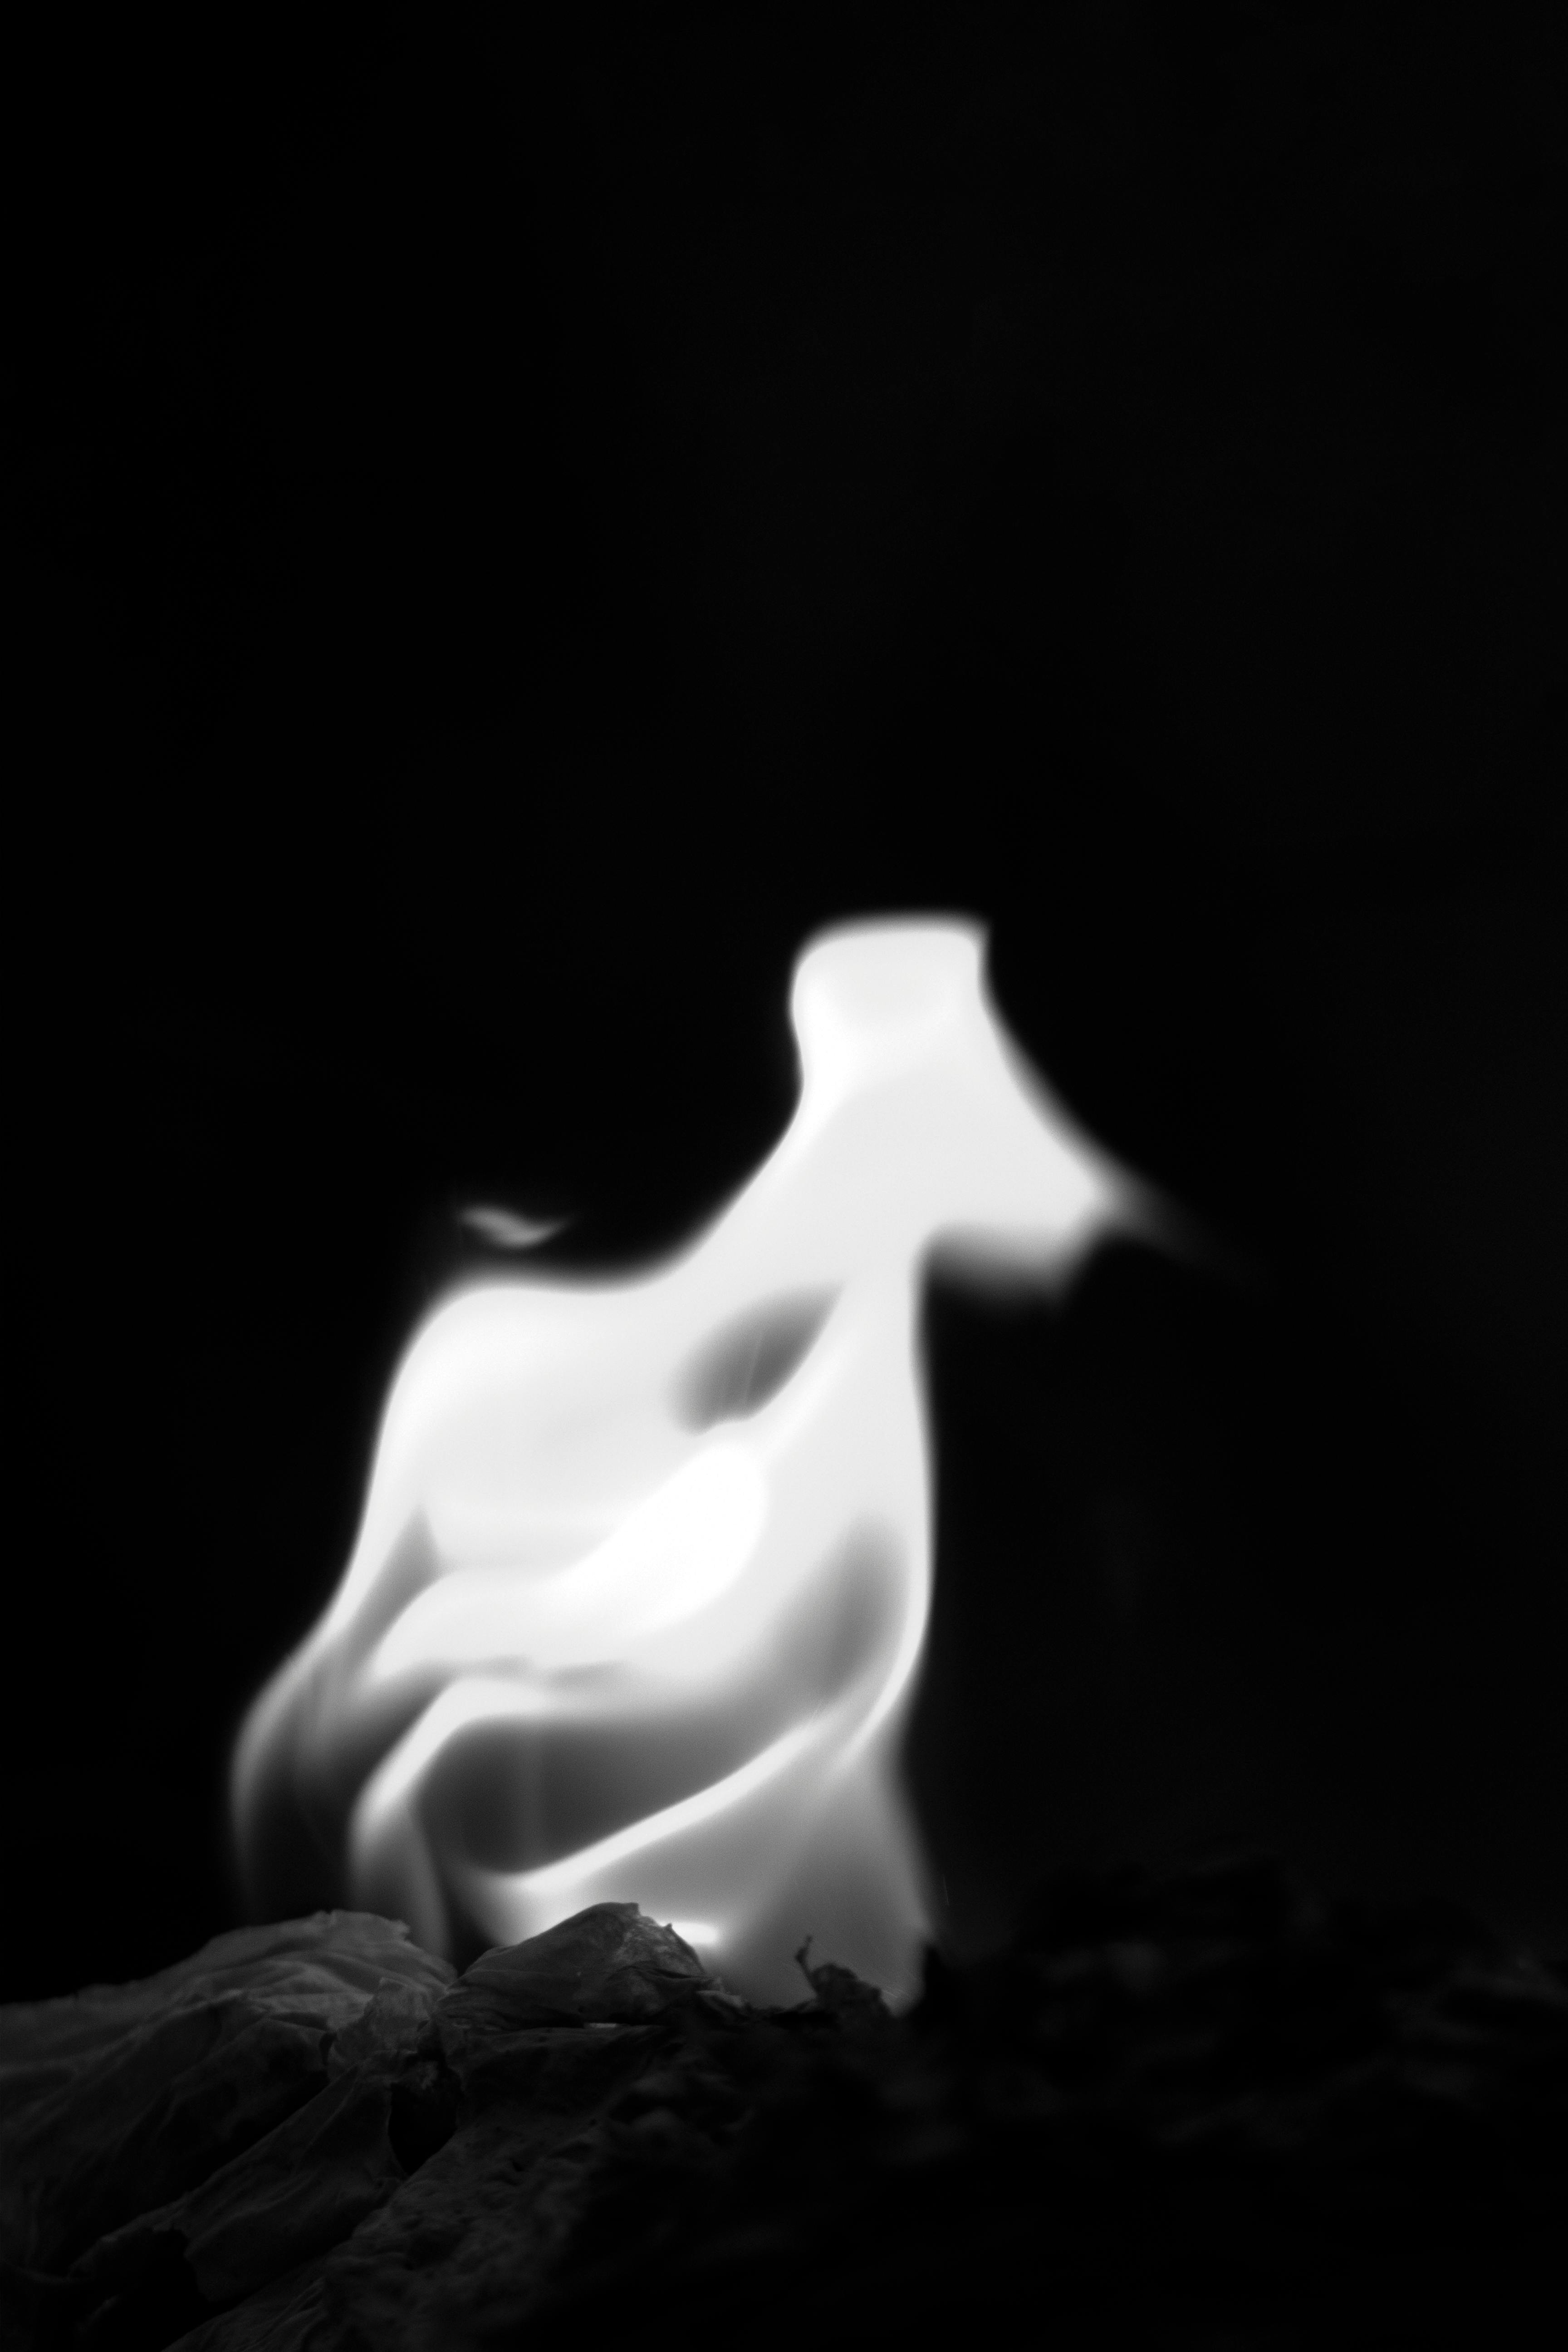 999+ Flame With Black Background Pictures | Download Free Images on Unsplash